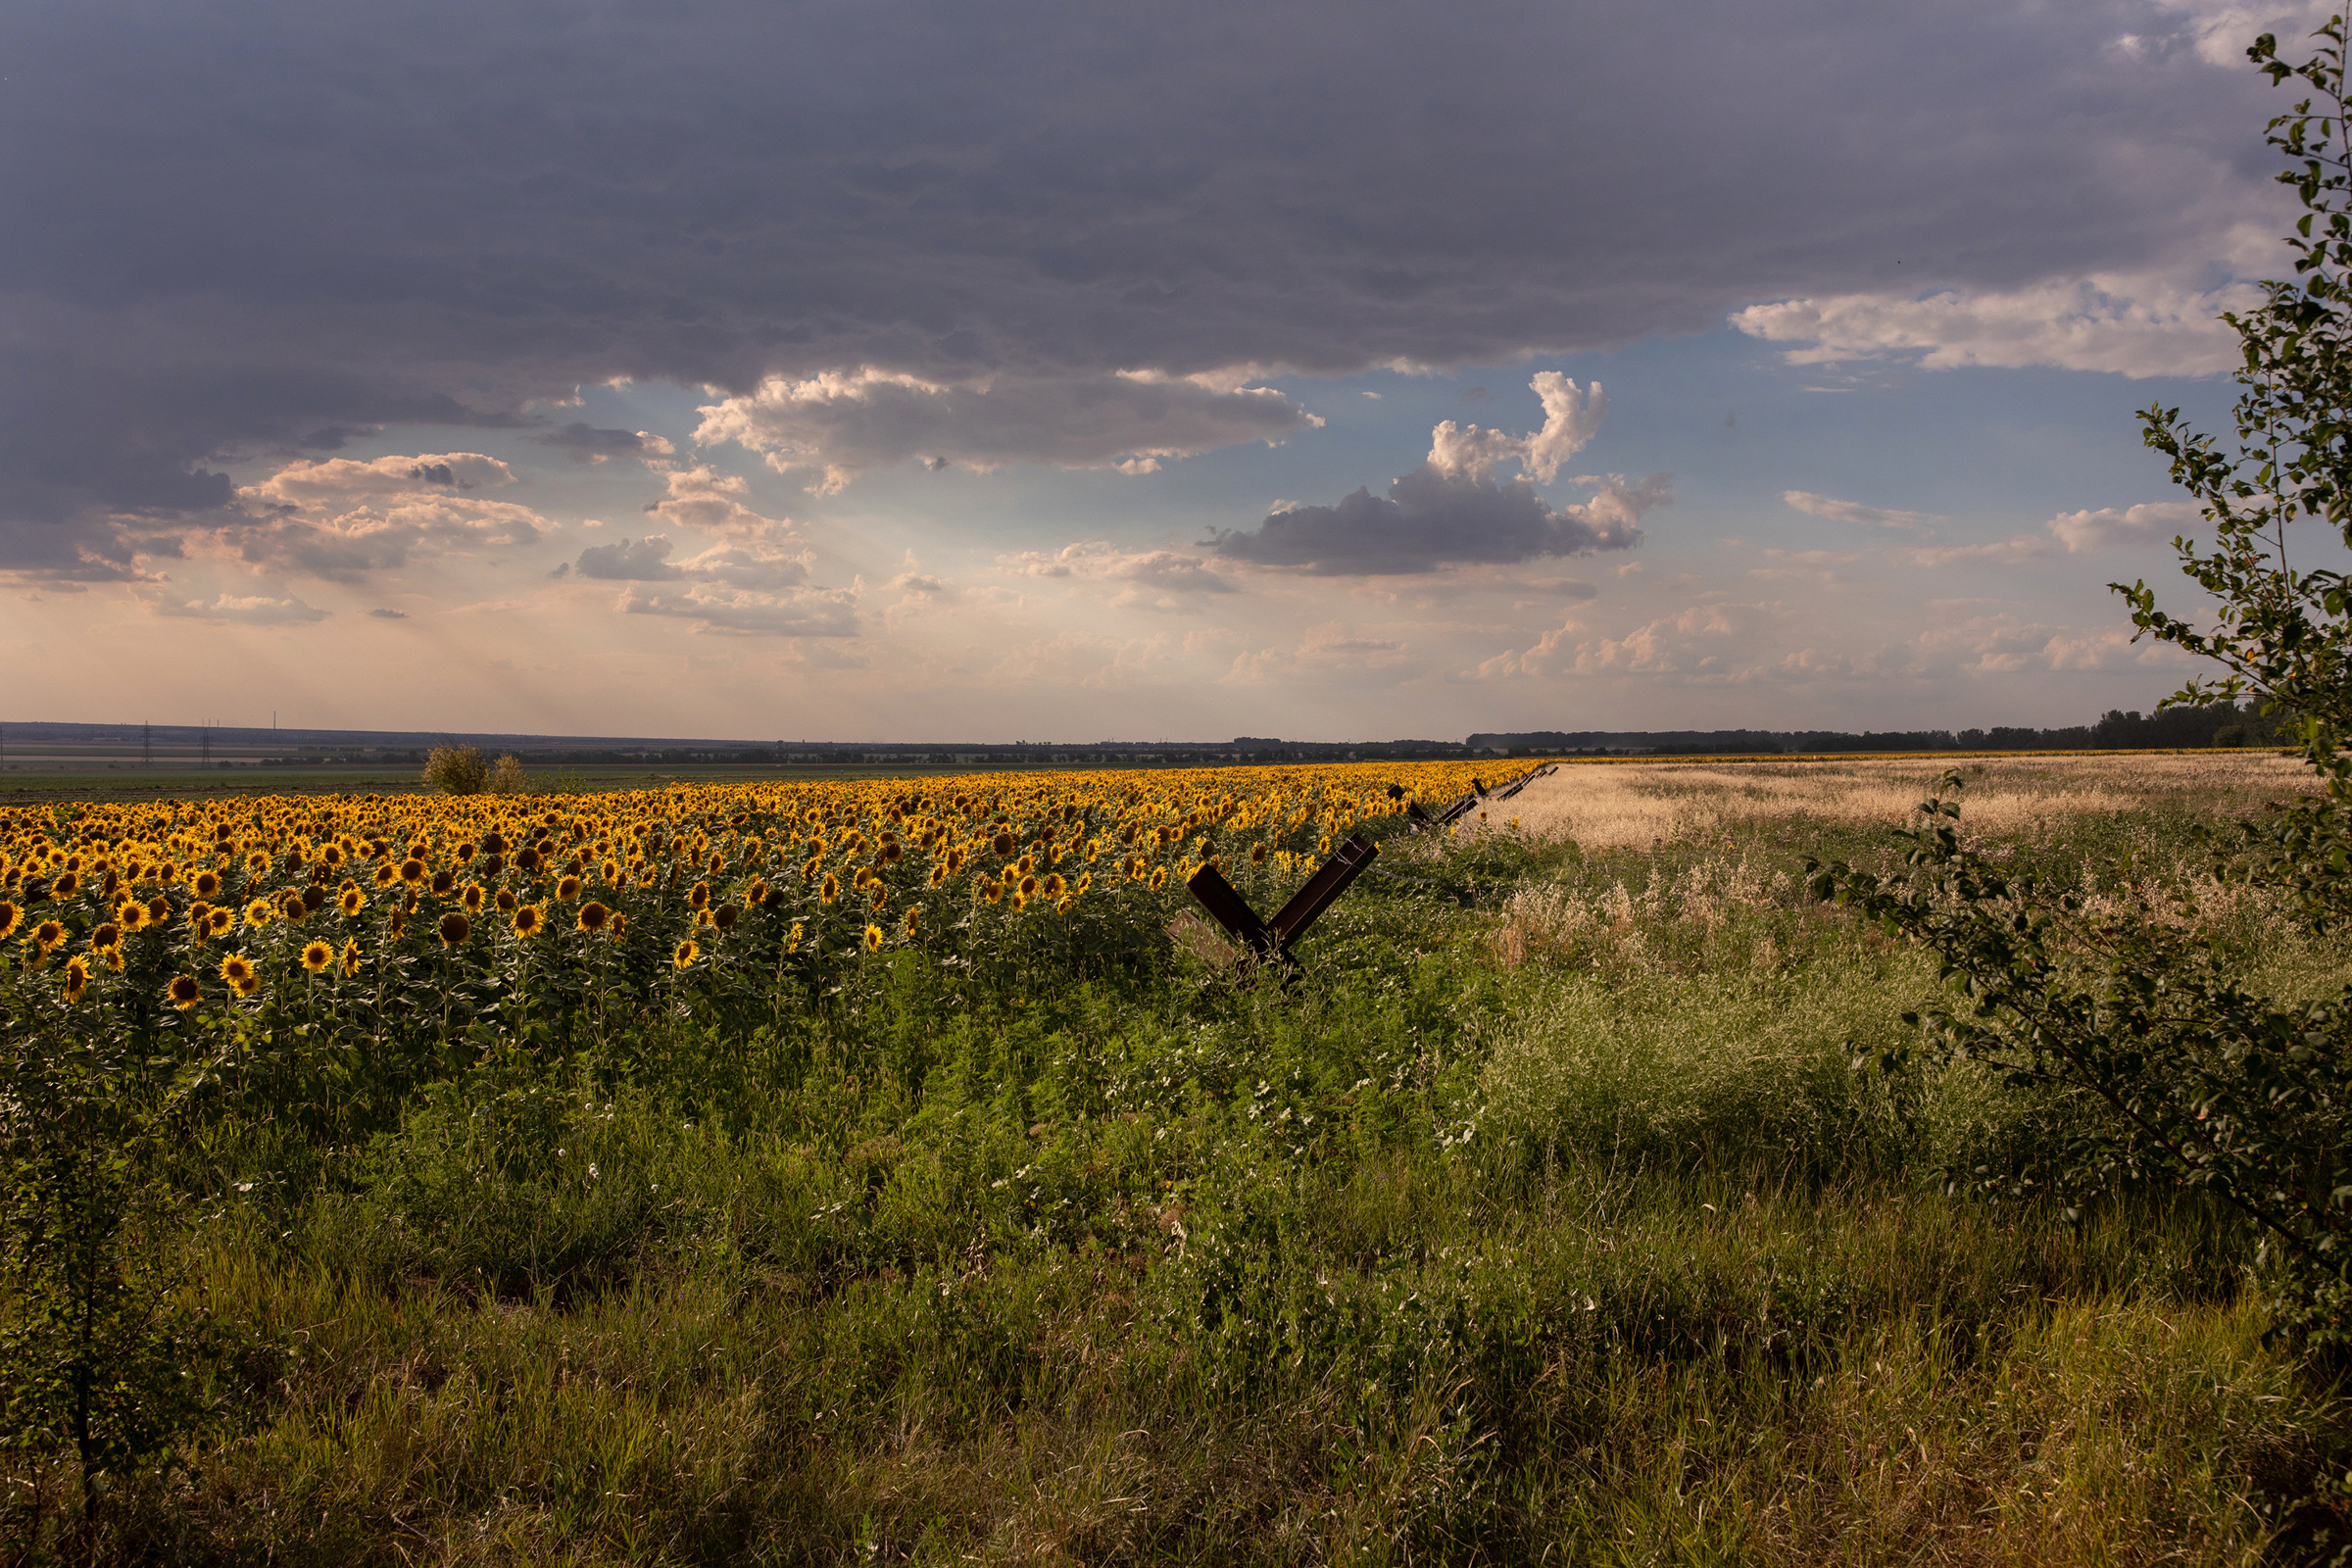 Antitank “hedgehog” devices line a sunflower field outside of Odesa on July 14. The entire region is dotted with defensive positions, check points, and pre-dug trenches, in case of a Russian advance. (Natalie Keyssar)